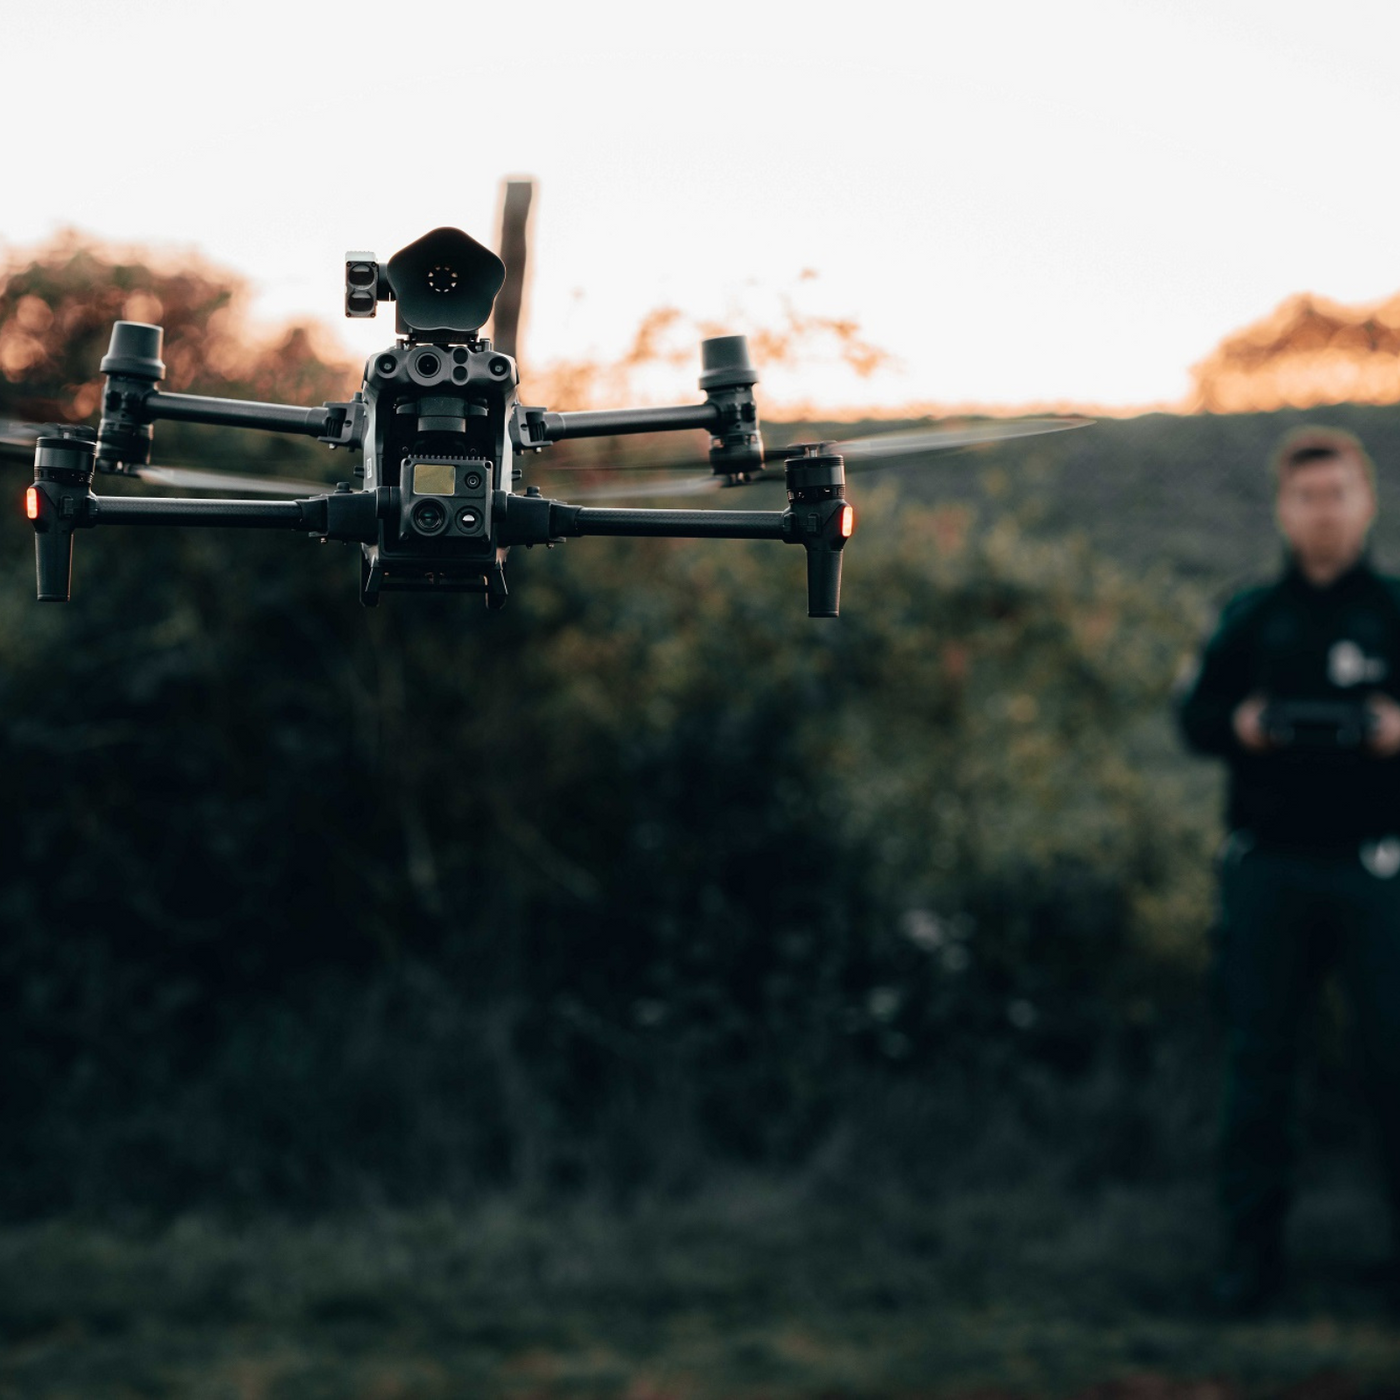 Addressing Data Security Concerns with DJI Drones